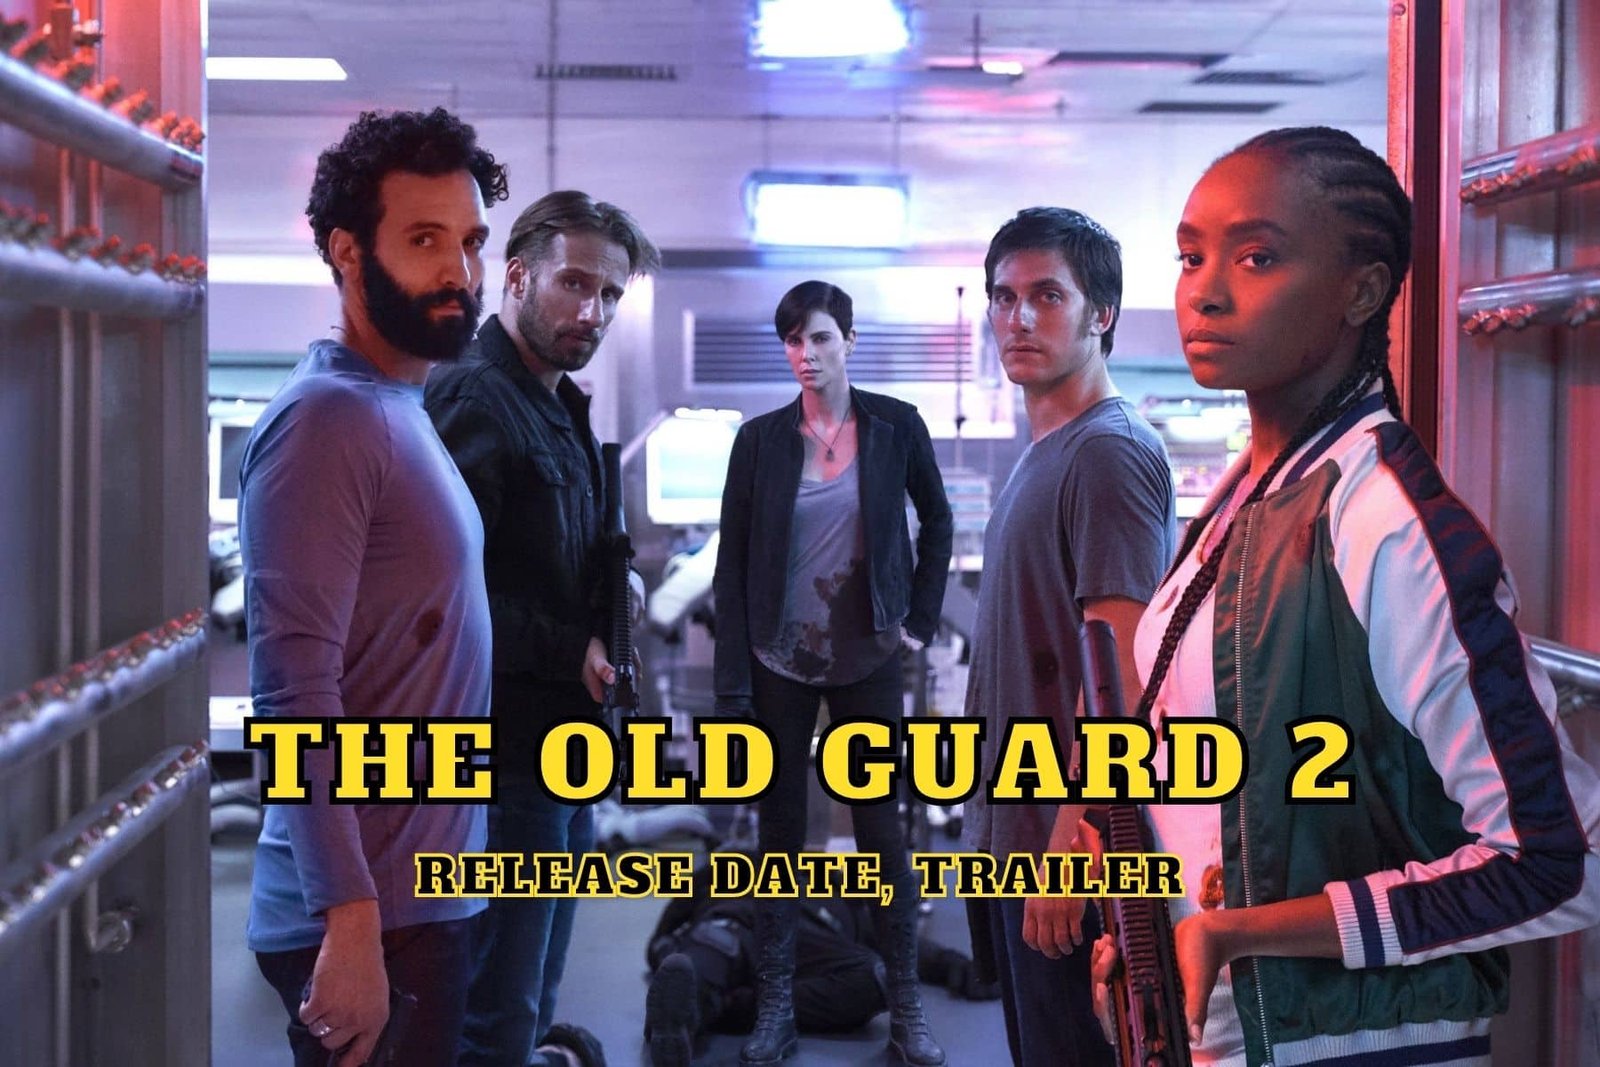 The Old Guard 2 Release Date, Trailer